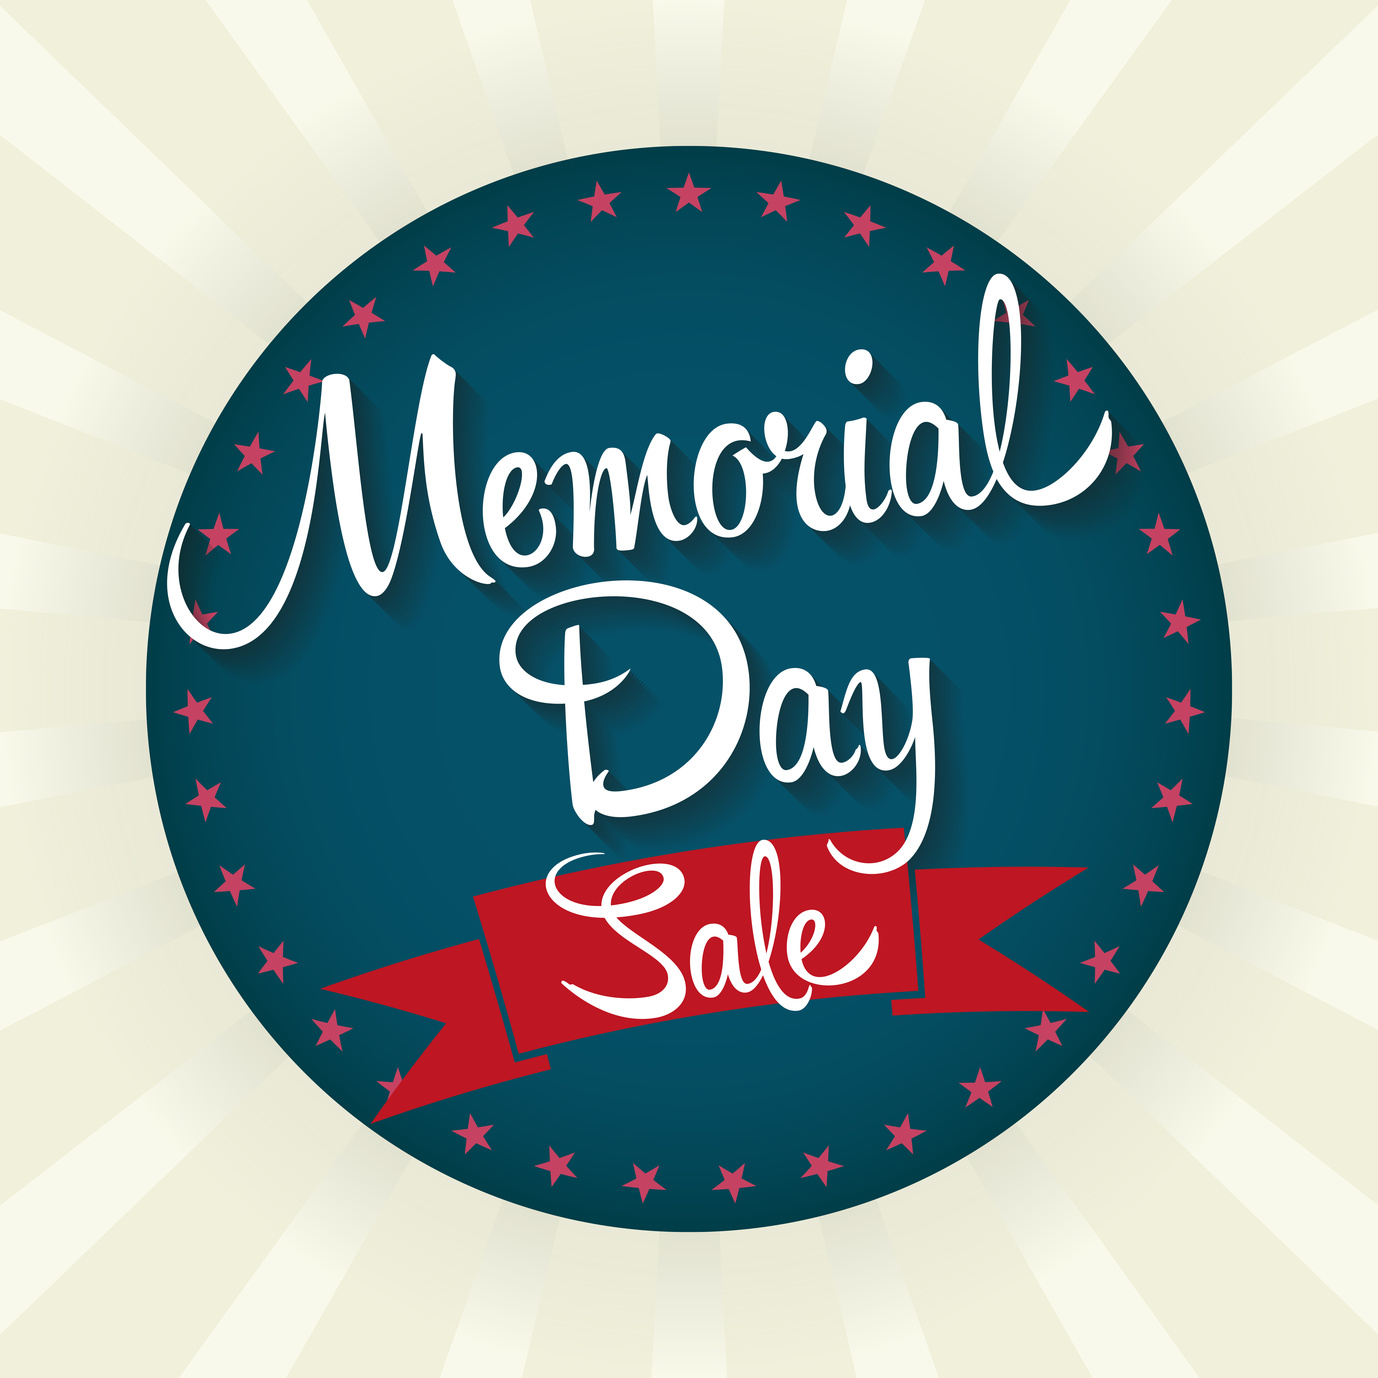 Memorial Day Sale Badge Vector Illustration. Text with Banner and Stars.